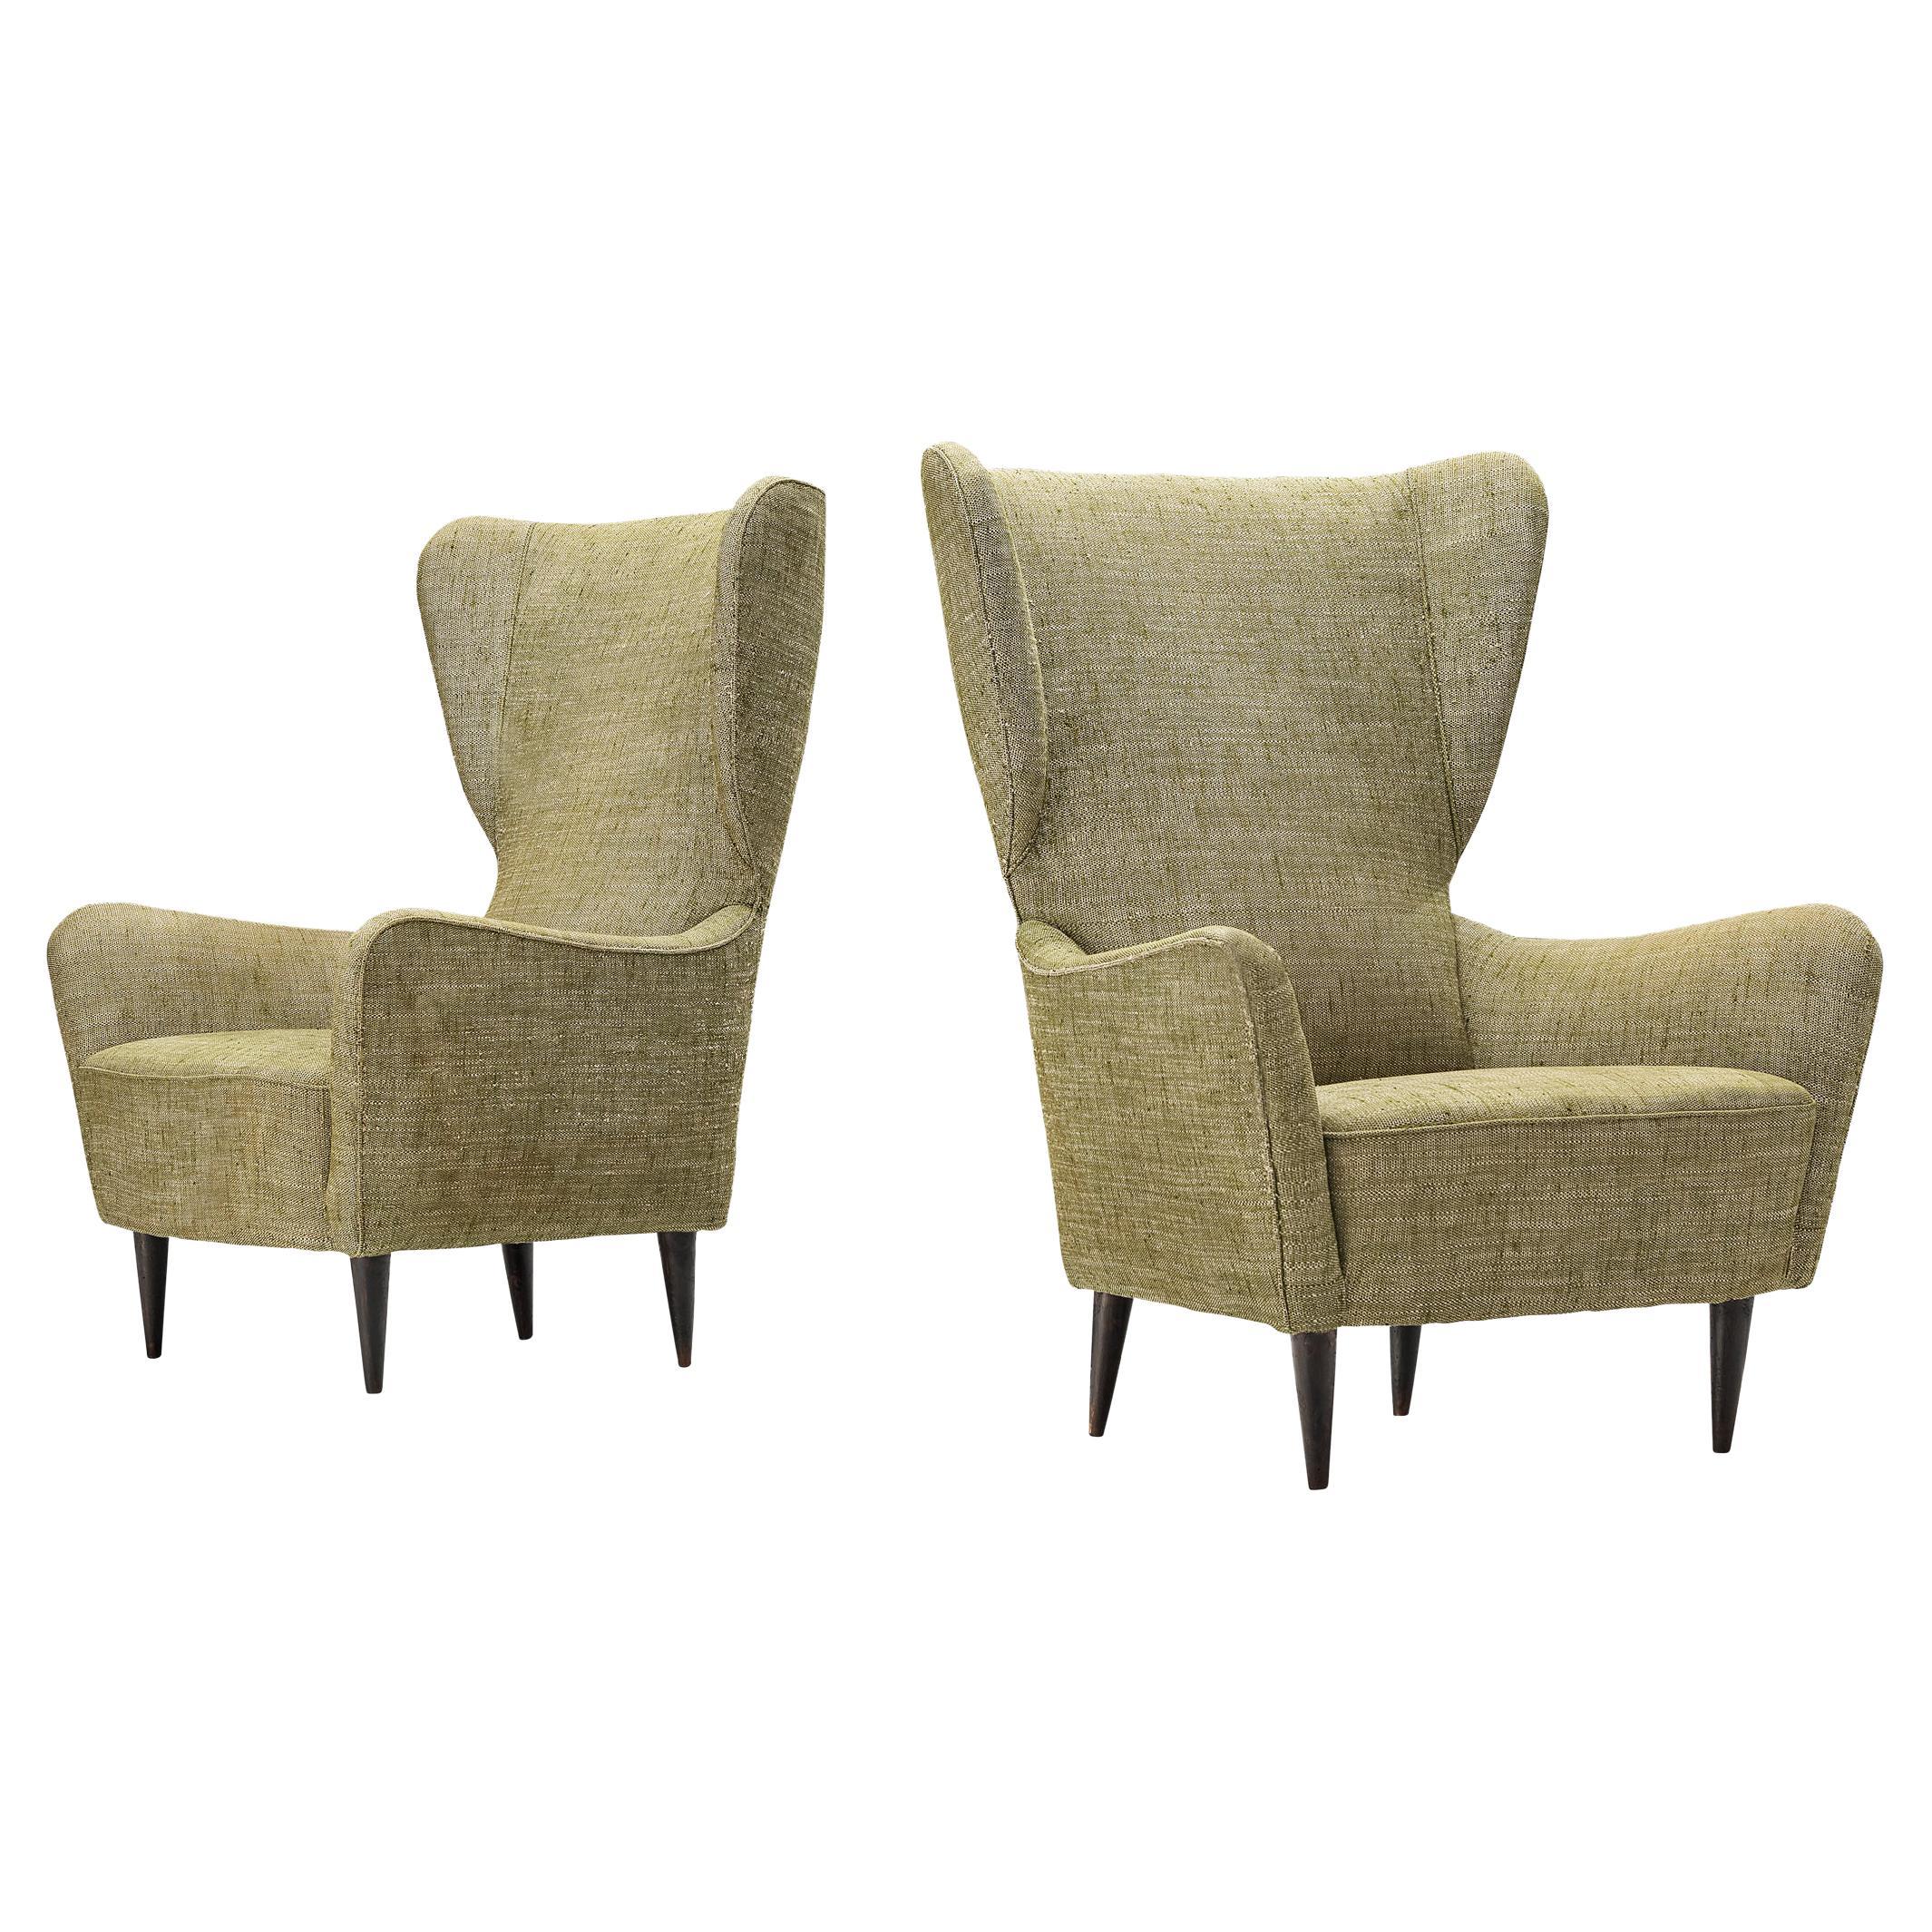 Italian Pair of Wingback Chairs in Olive Green Upholstery